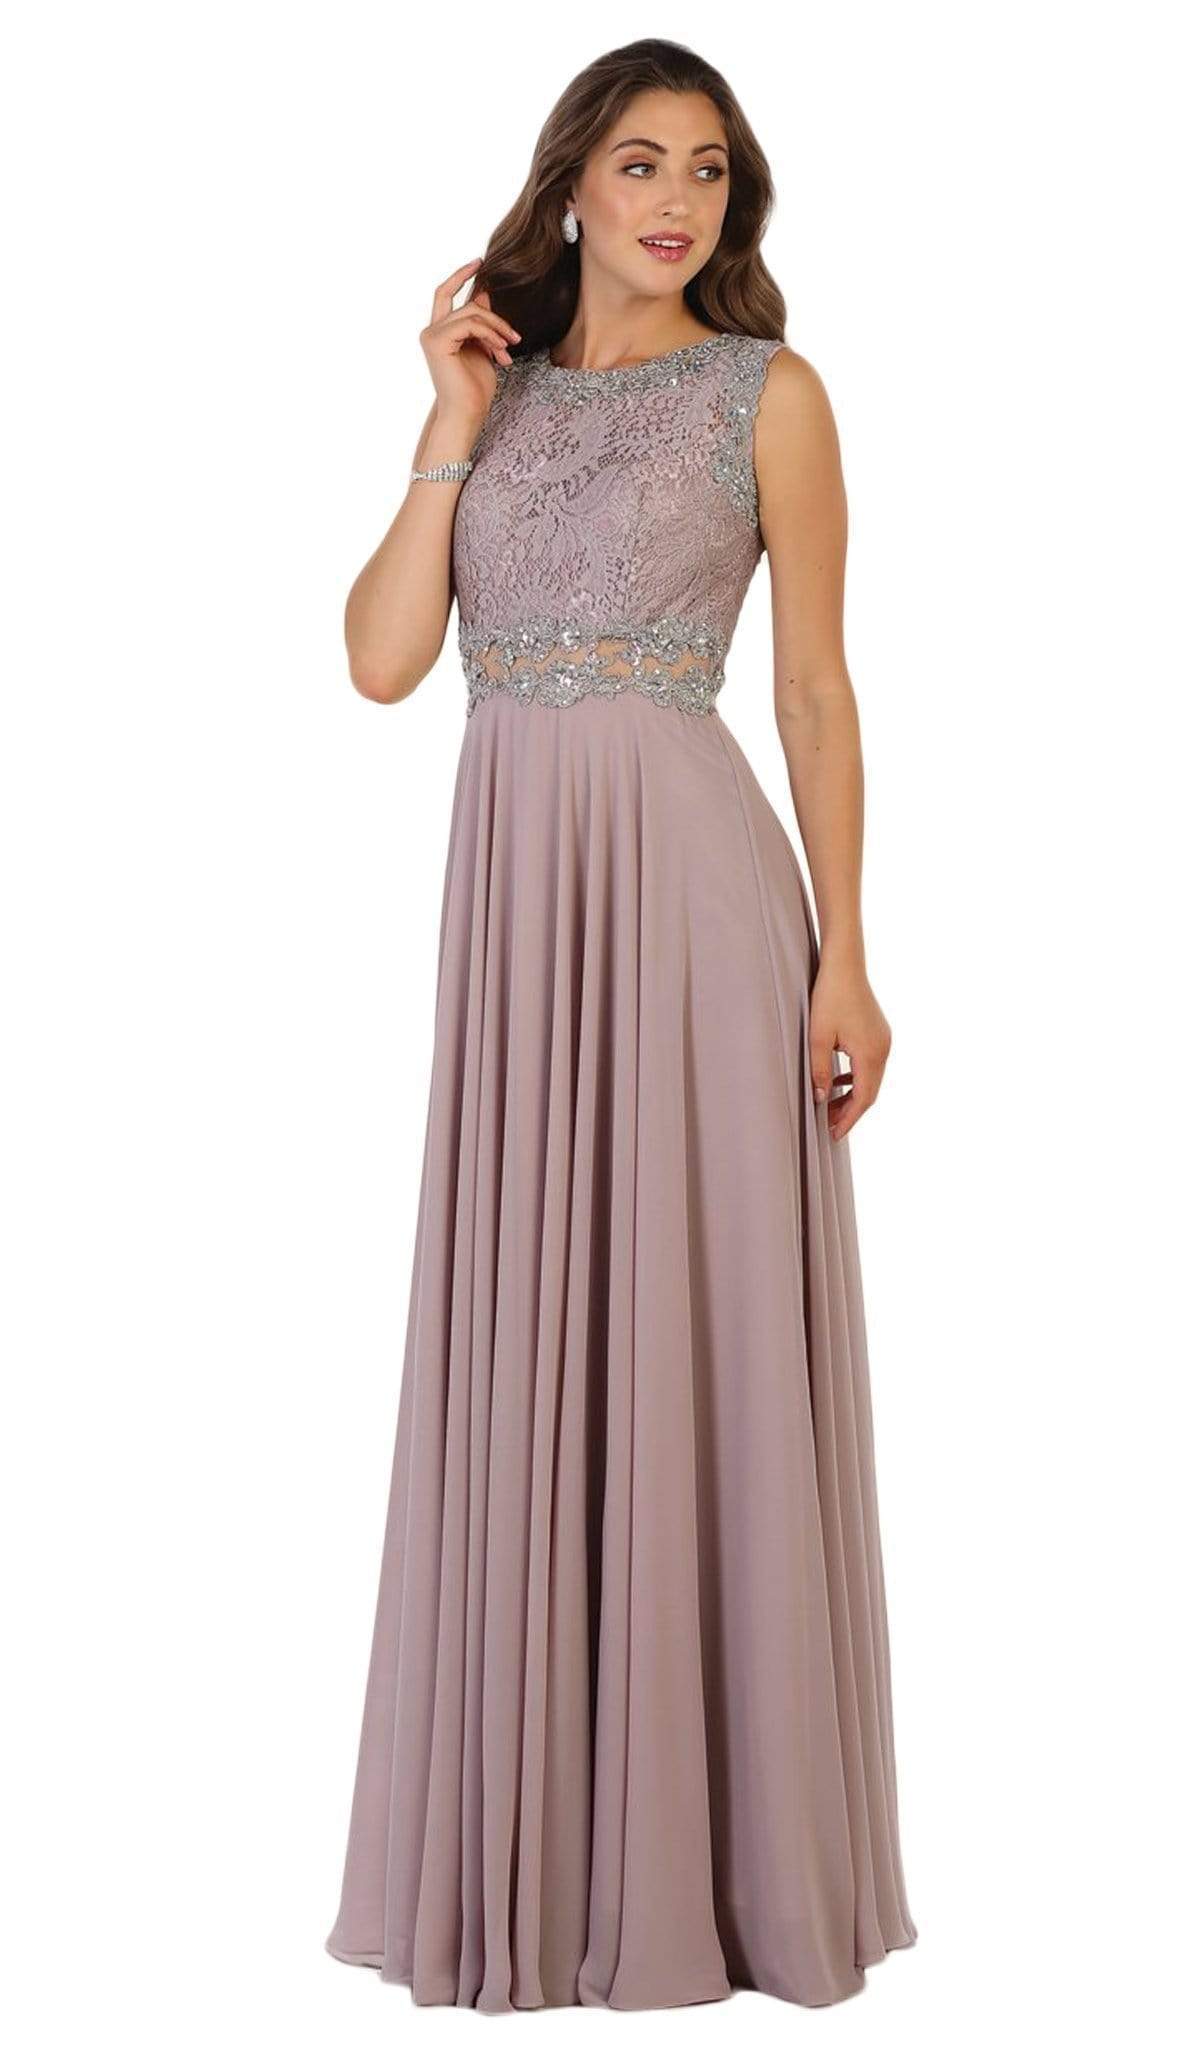 Image of May Queen - Embellished Lace Pleated Prom Dress